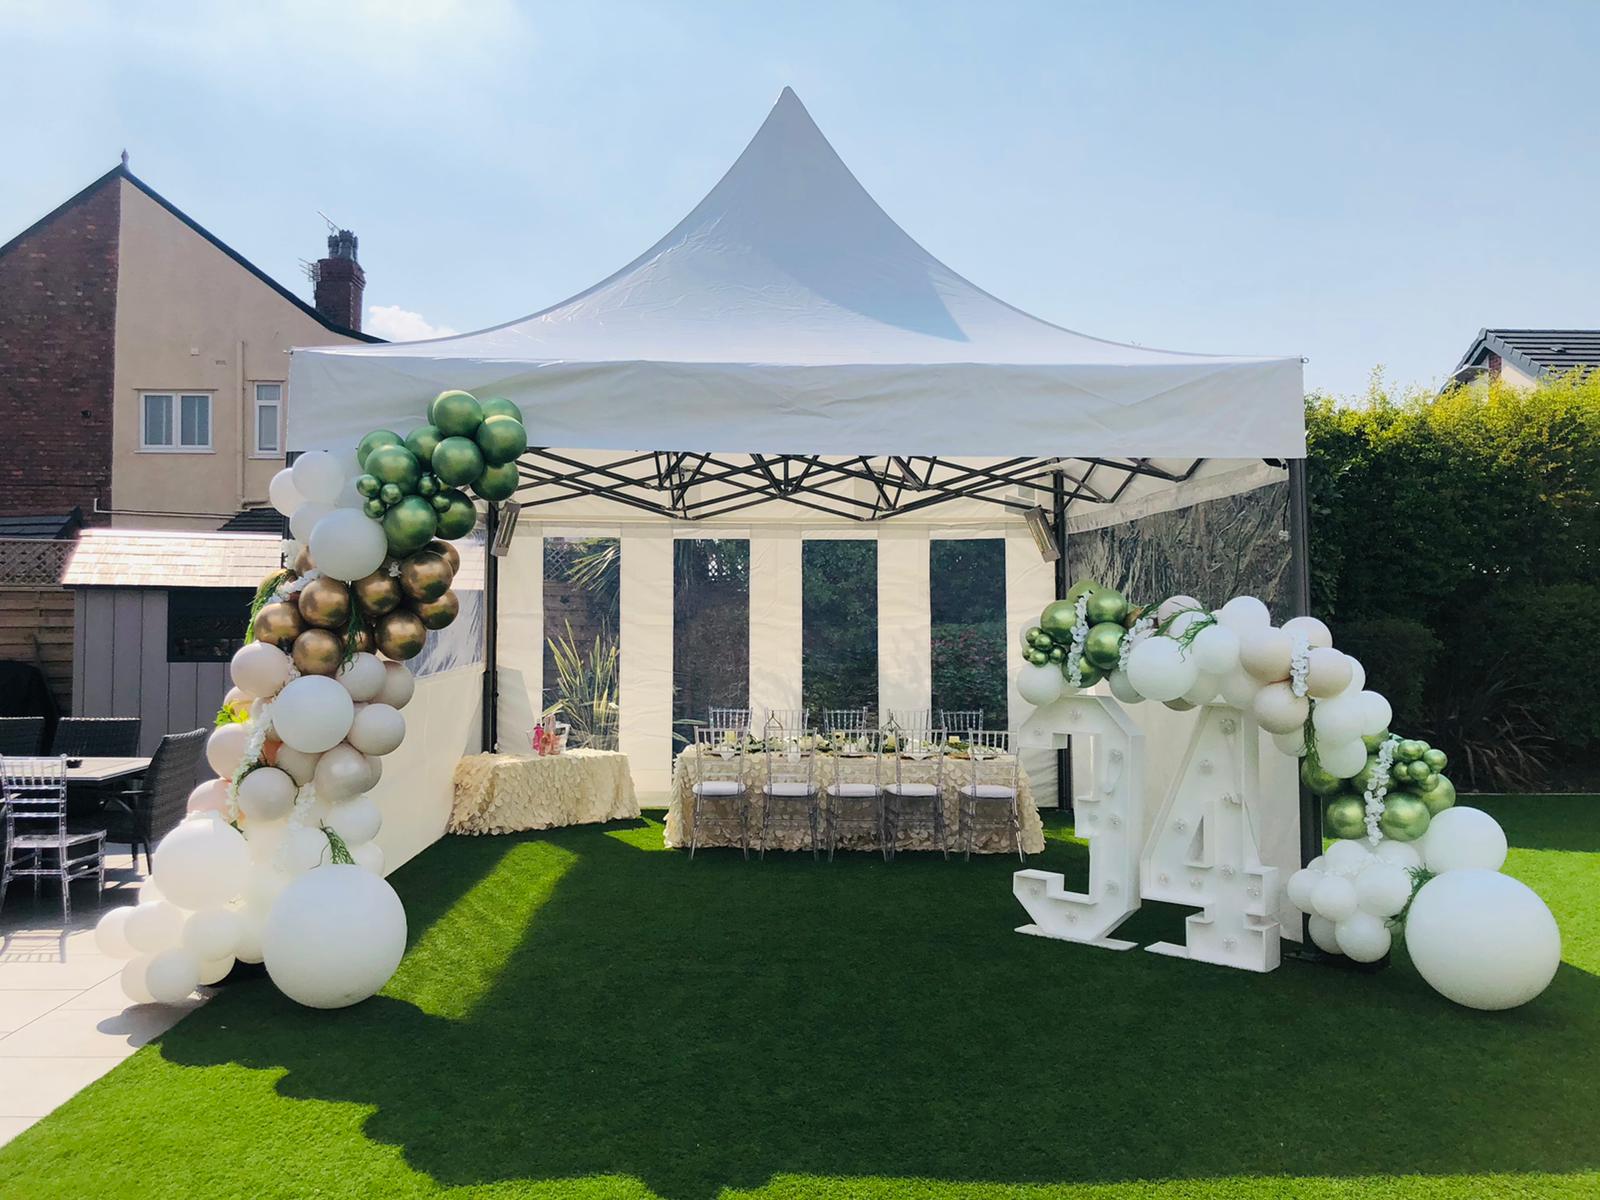 Front of 5m x 5m Pagoda Marquee